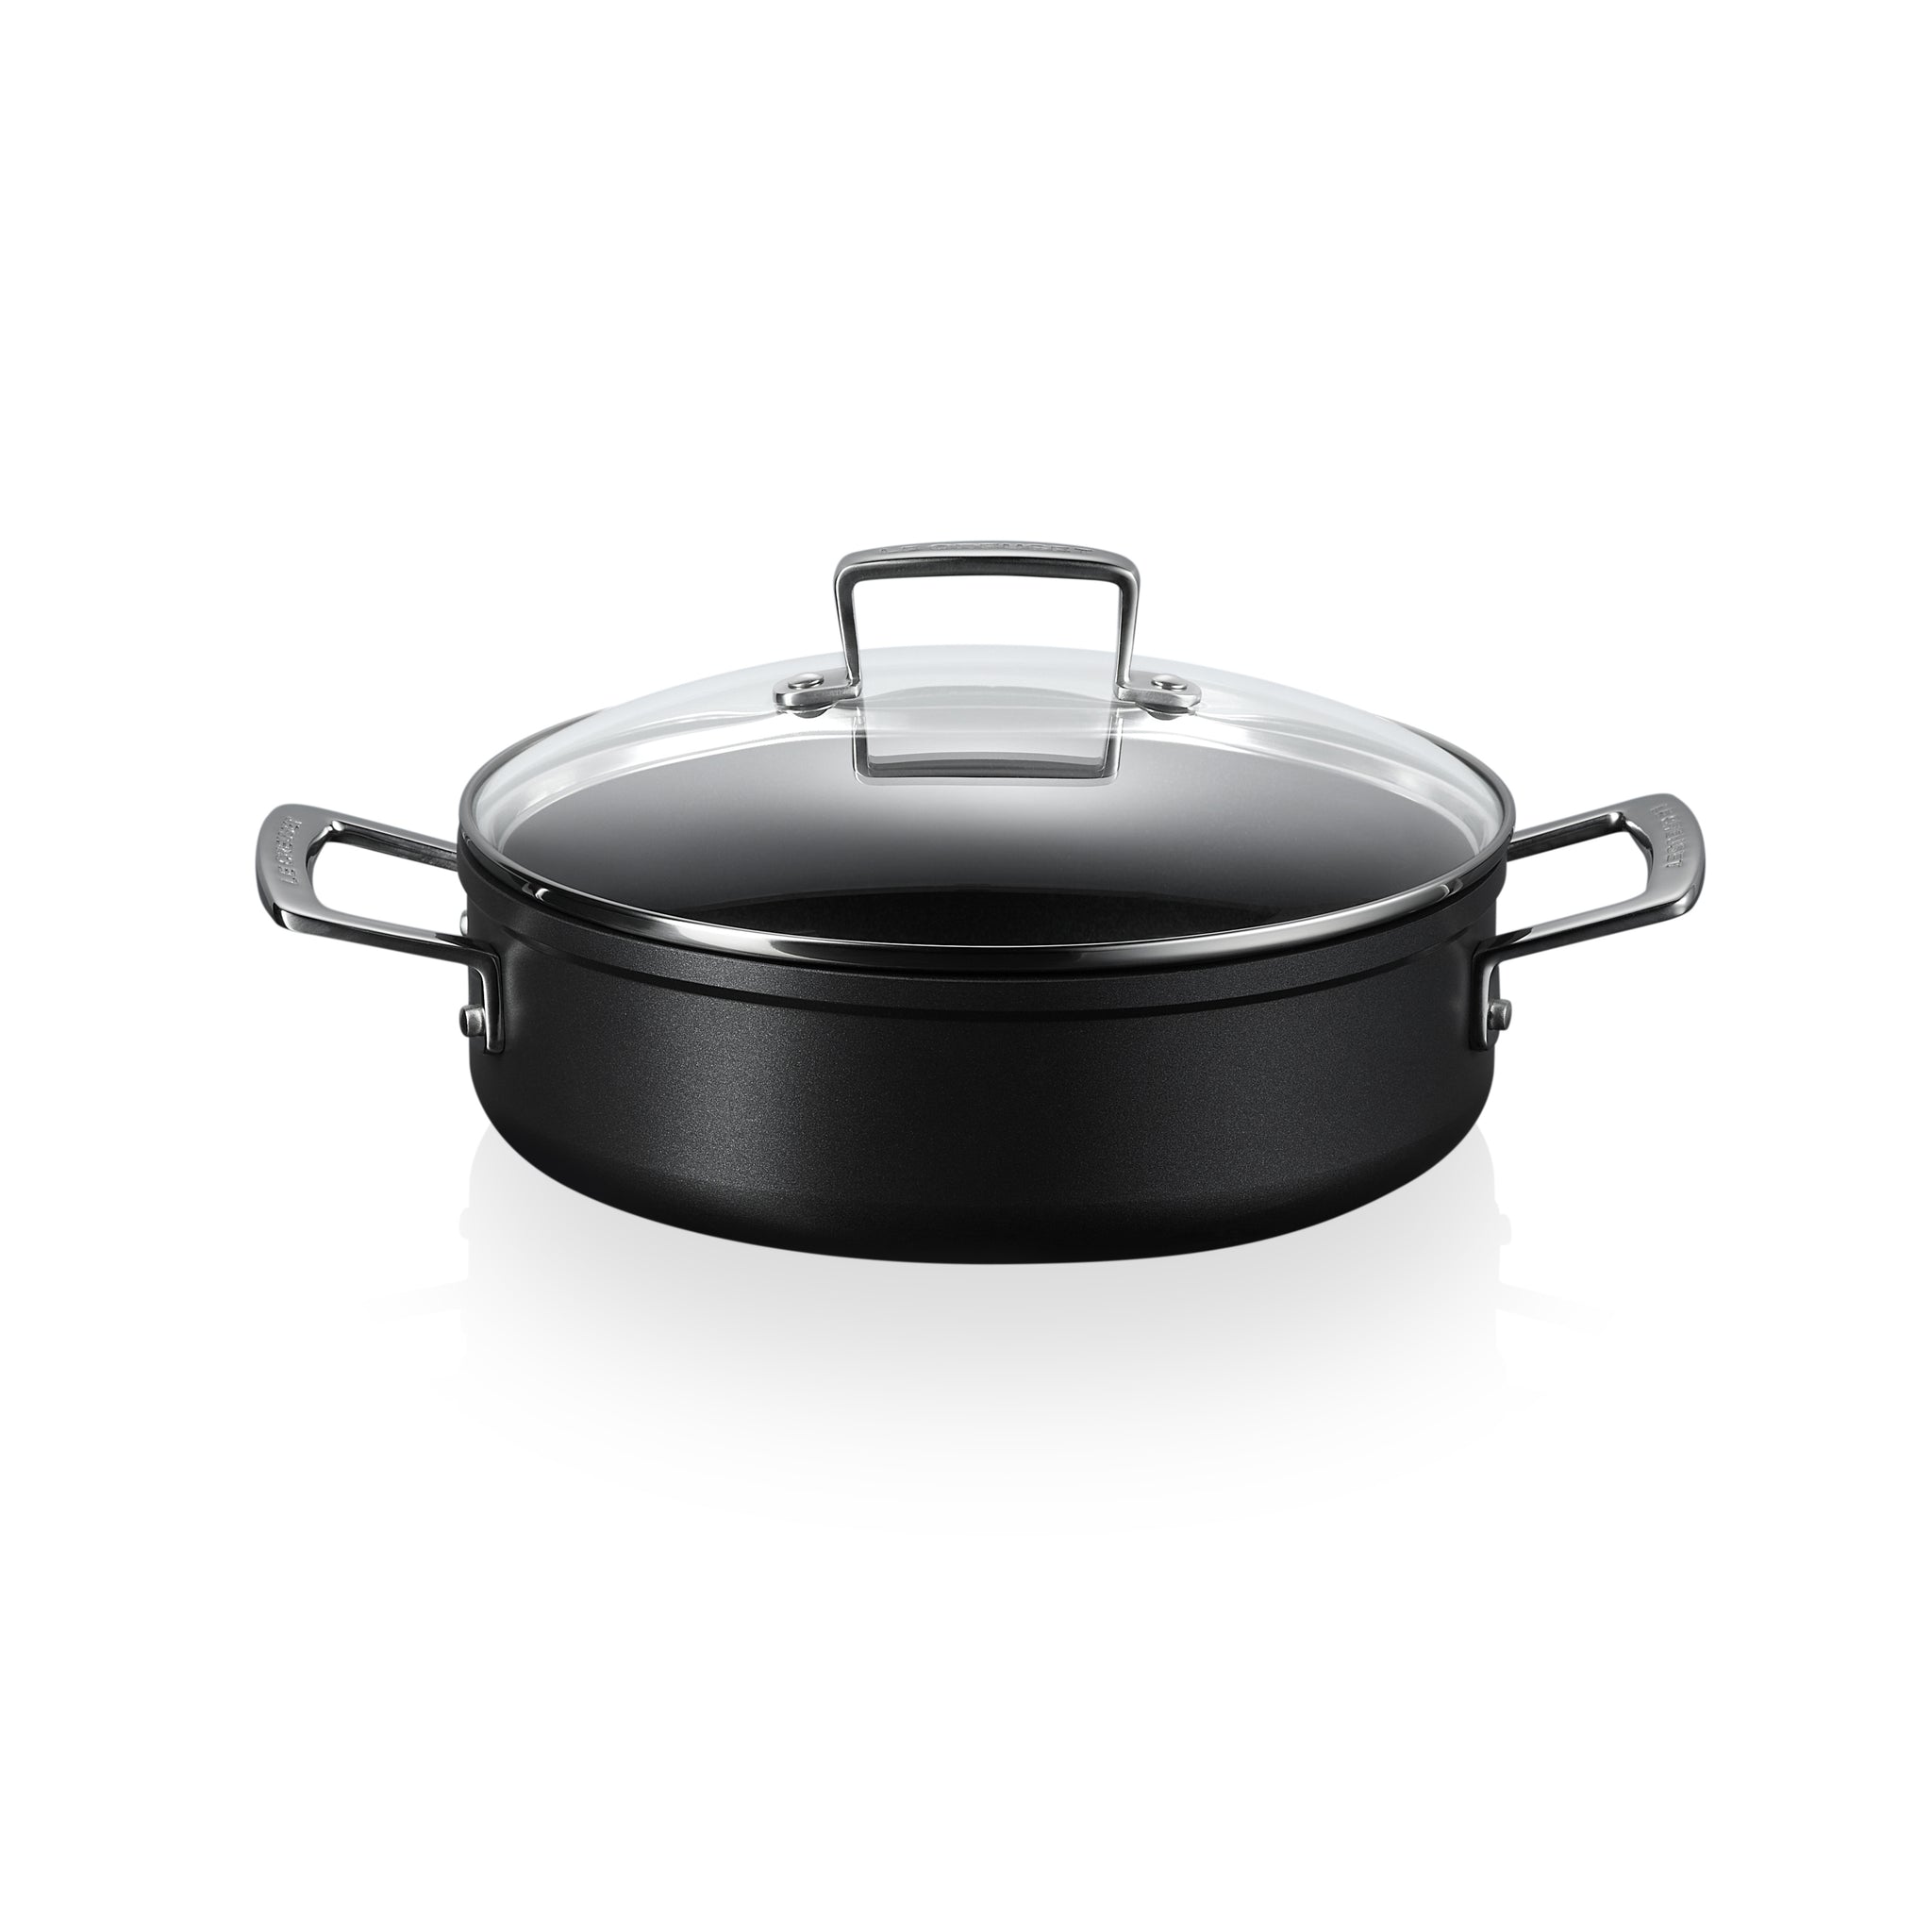 Induction stainless steel 18/10 deep pan - Ø 16 cm - Chef Classic - Lacor